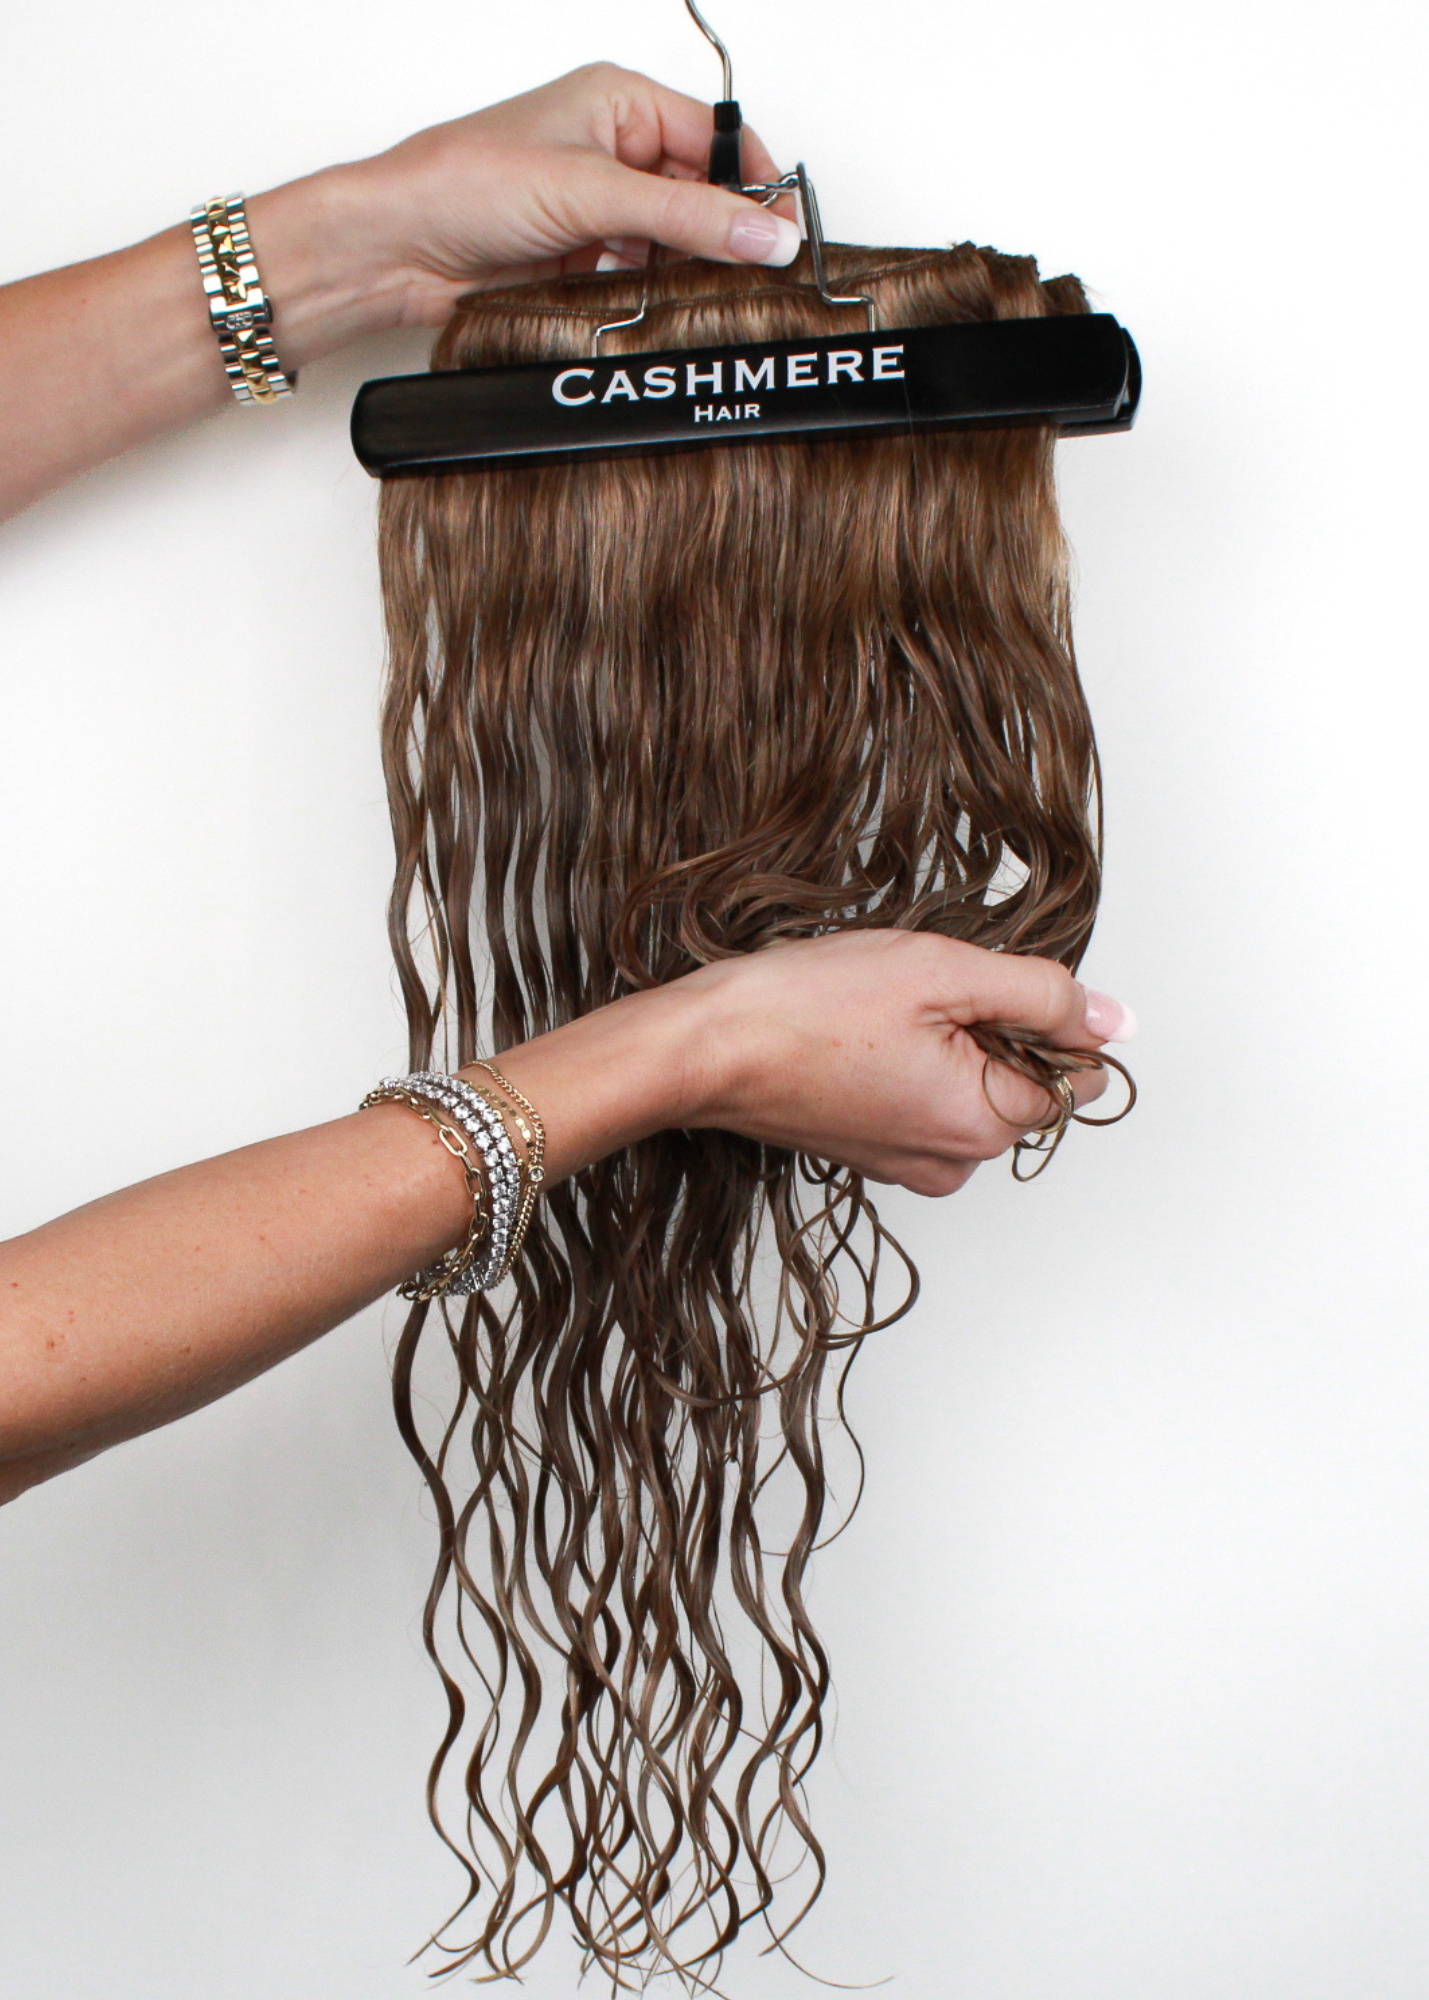 scrunching wet cashmere hair extensions to promote natural waves